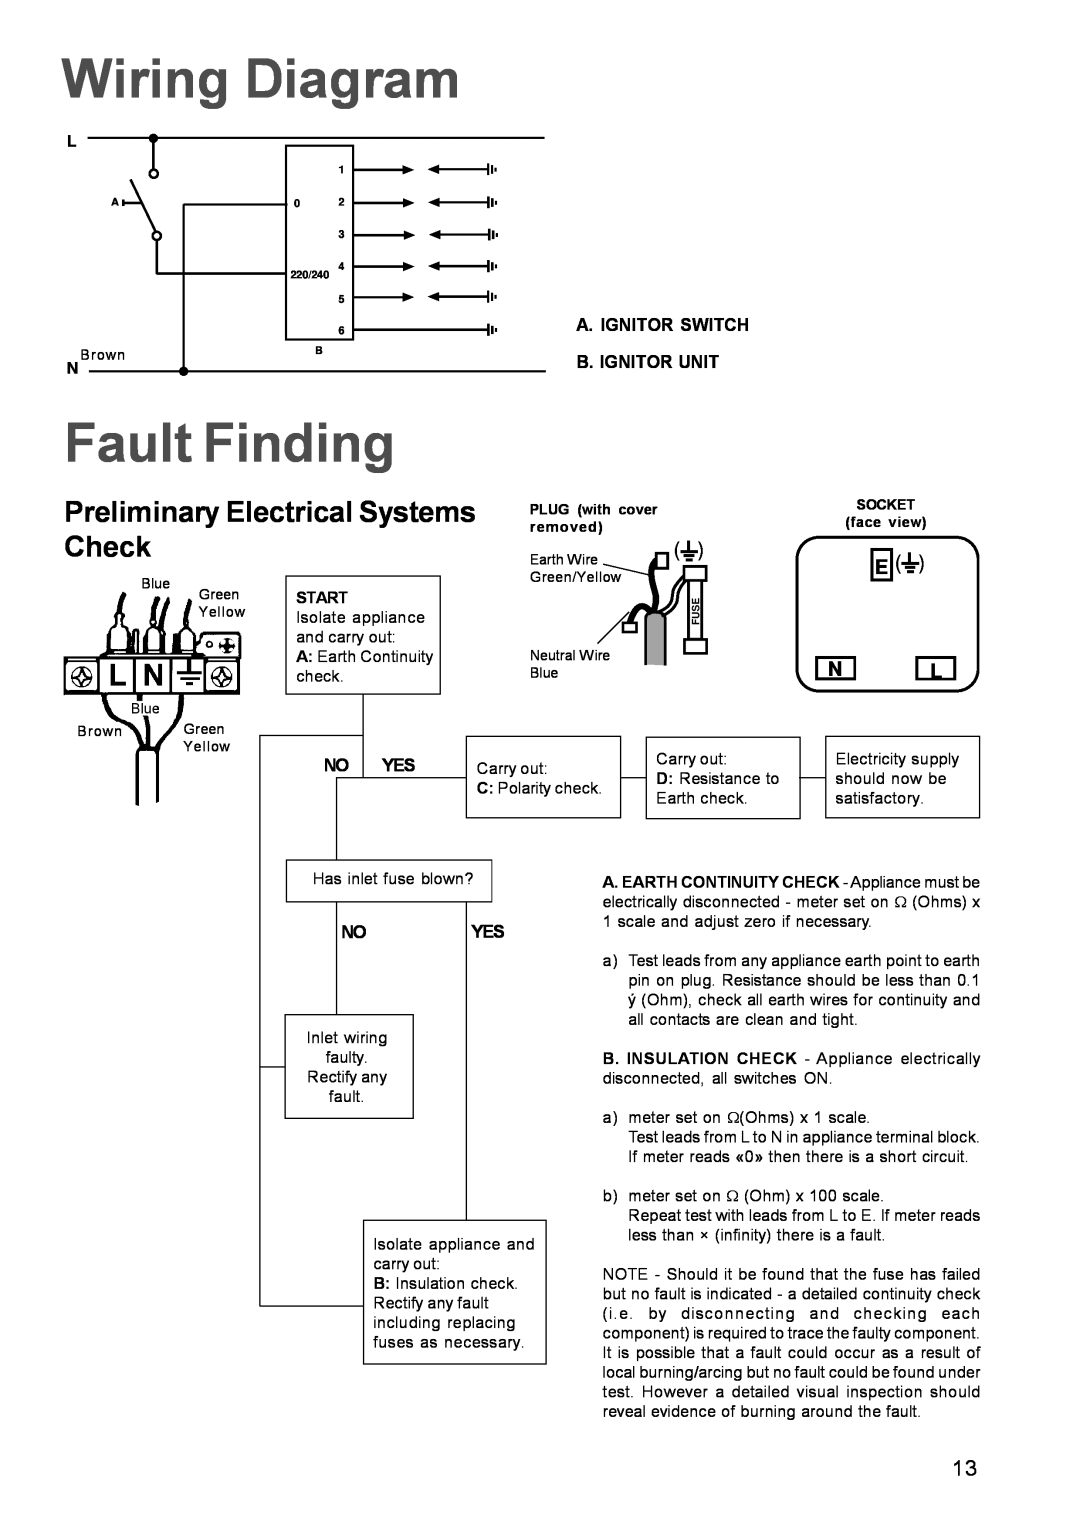 Zanussi ZGG642C manual Wiring Diagram, Fault Finding, Preliminary Electrical Systems, Check 